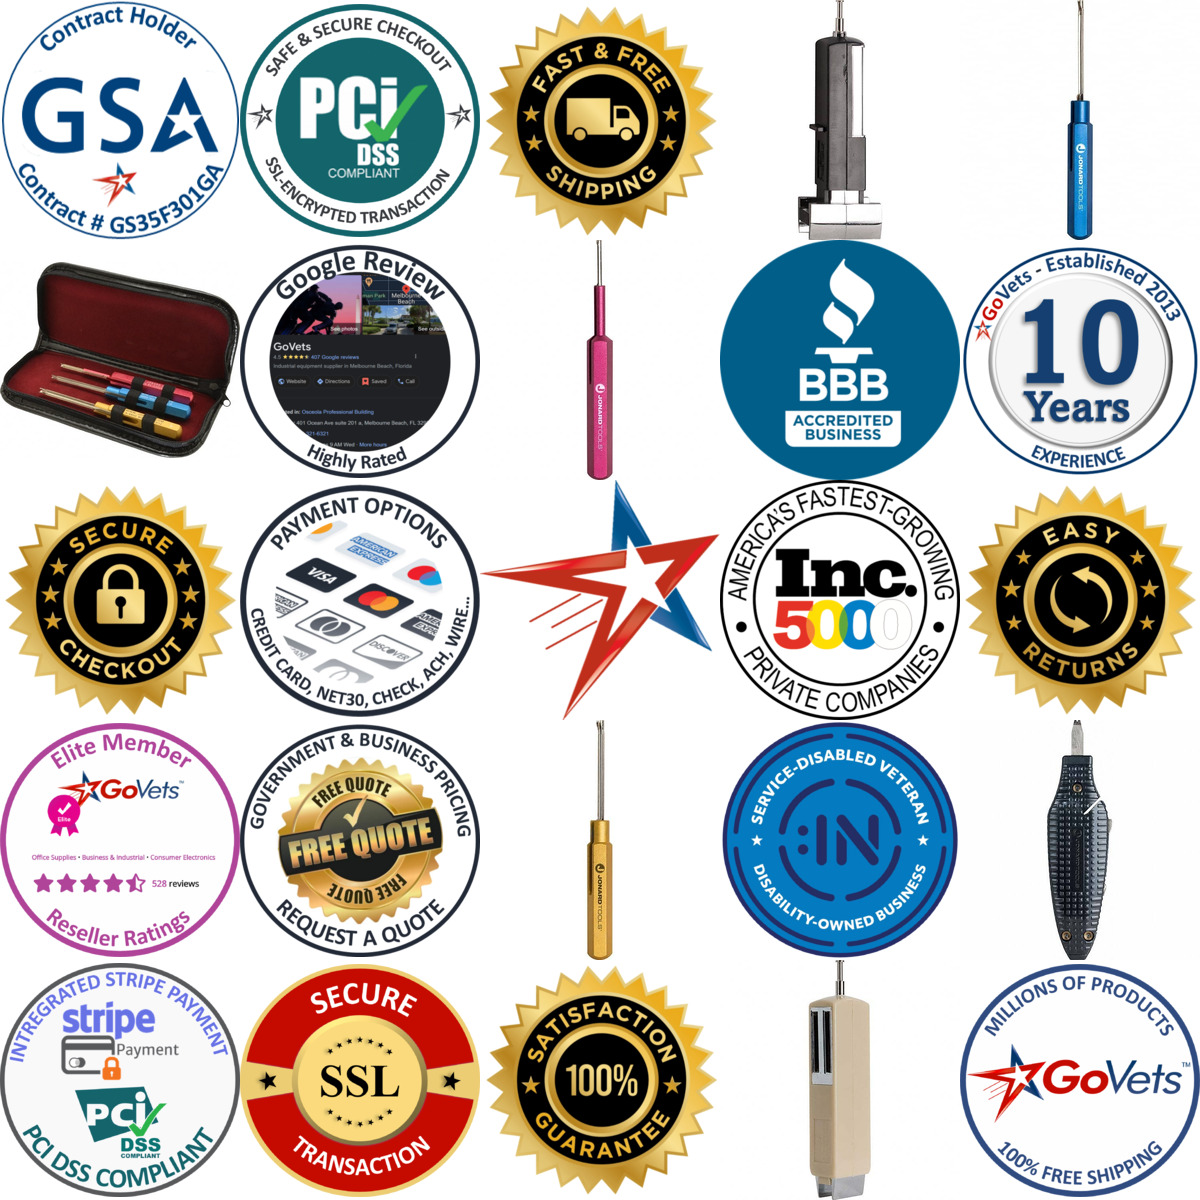 A selection of ic Tools and Accessories products on GoVets